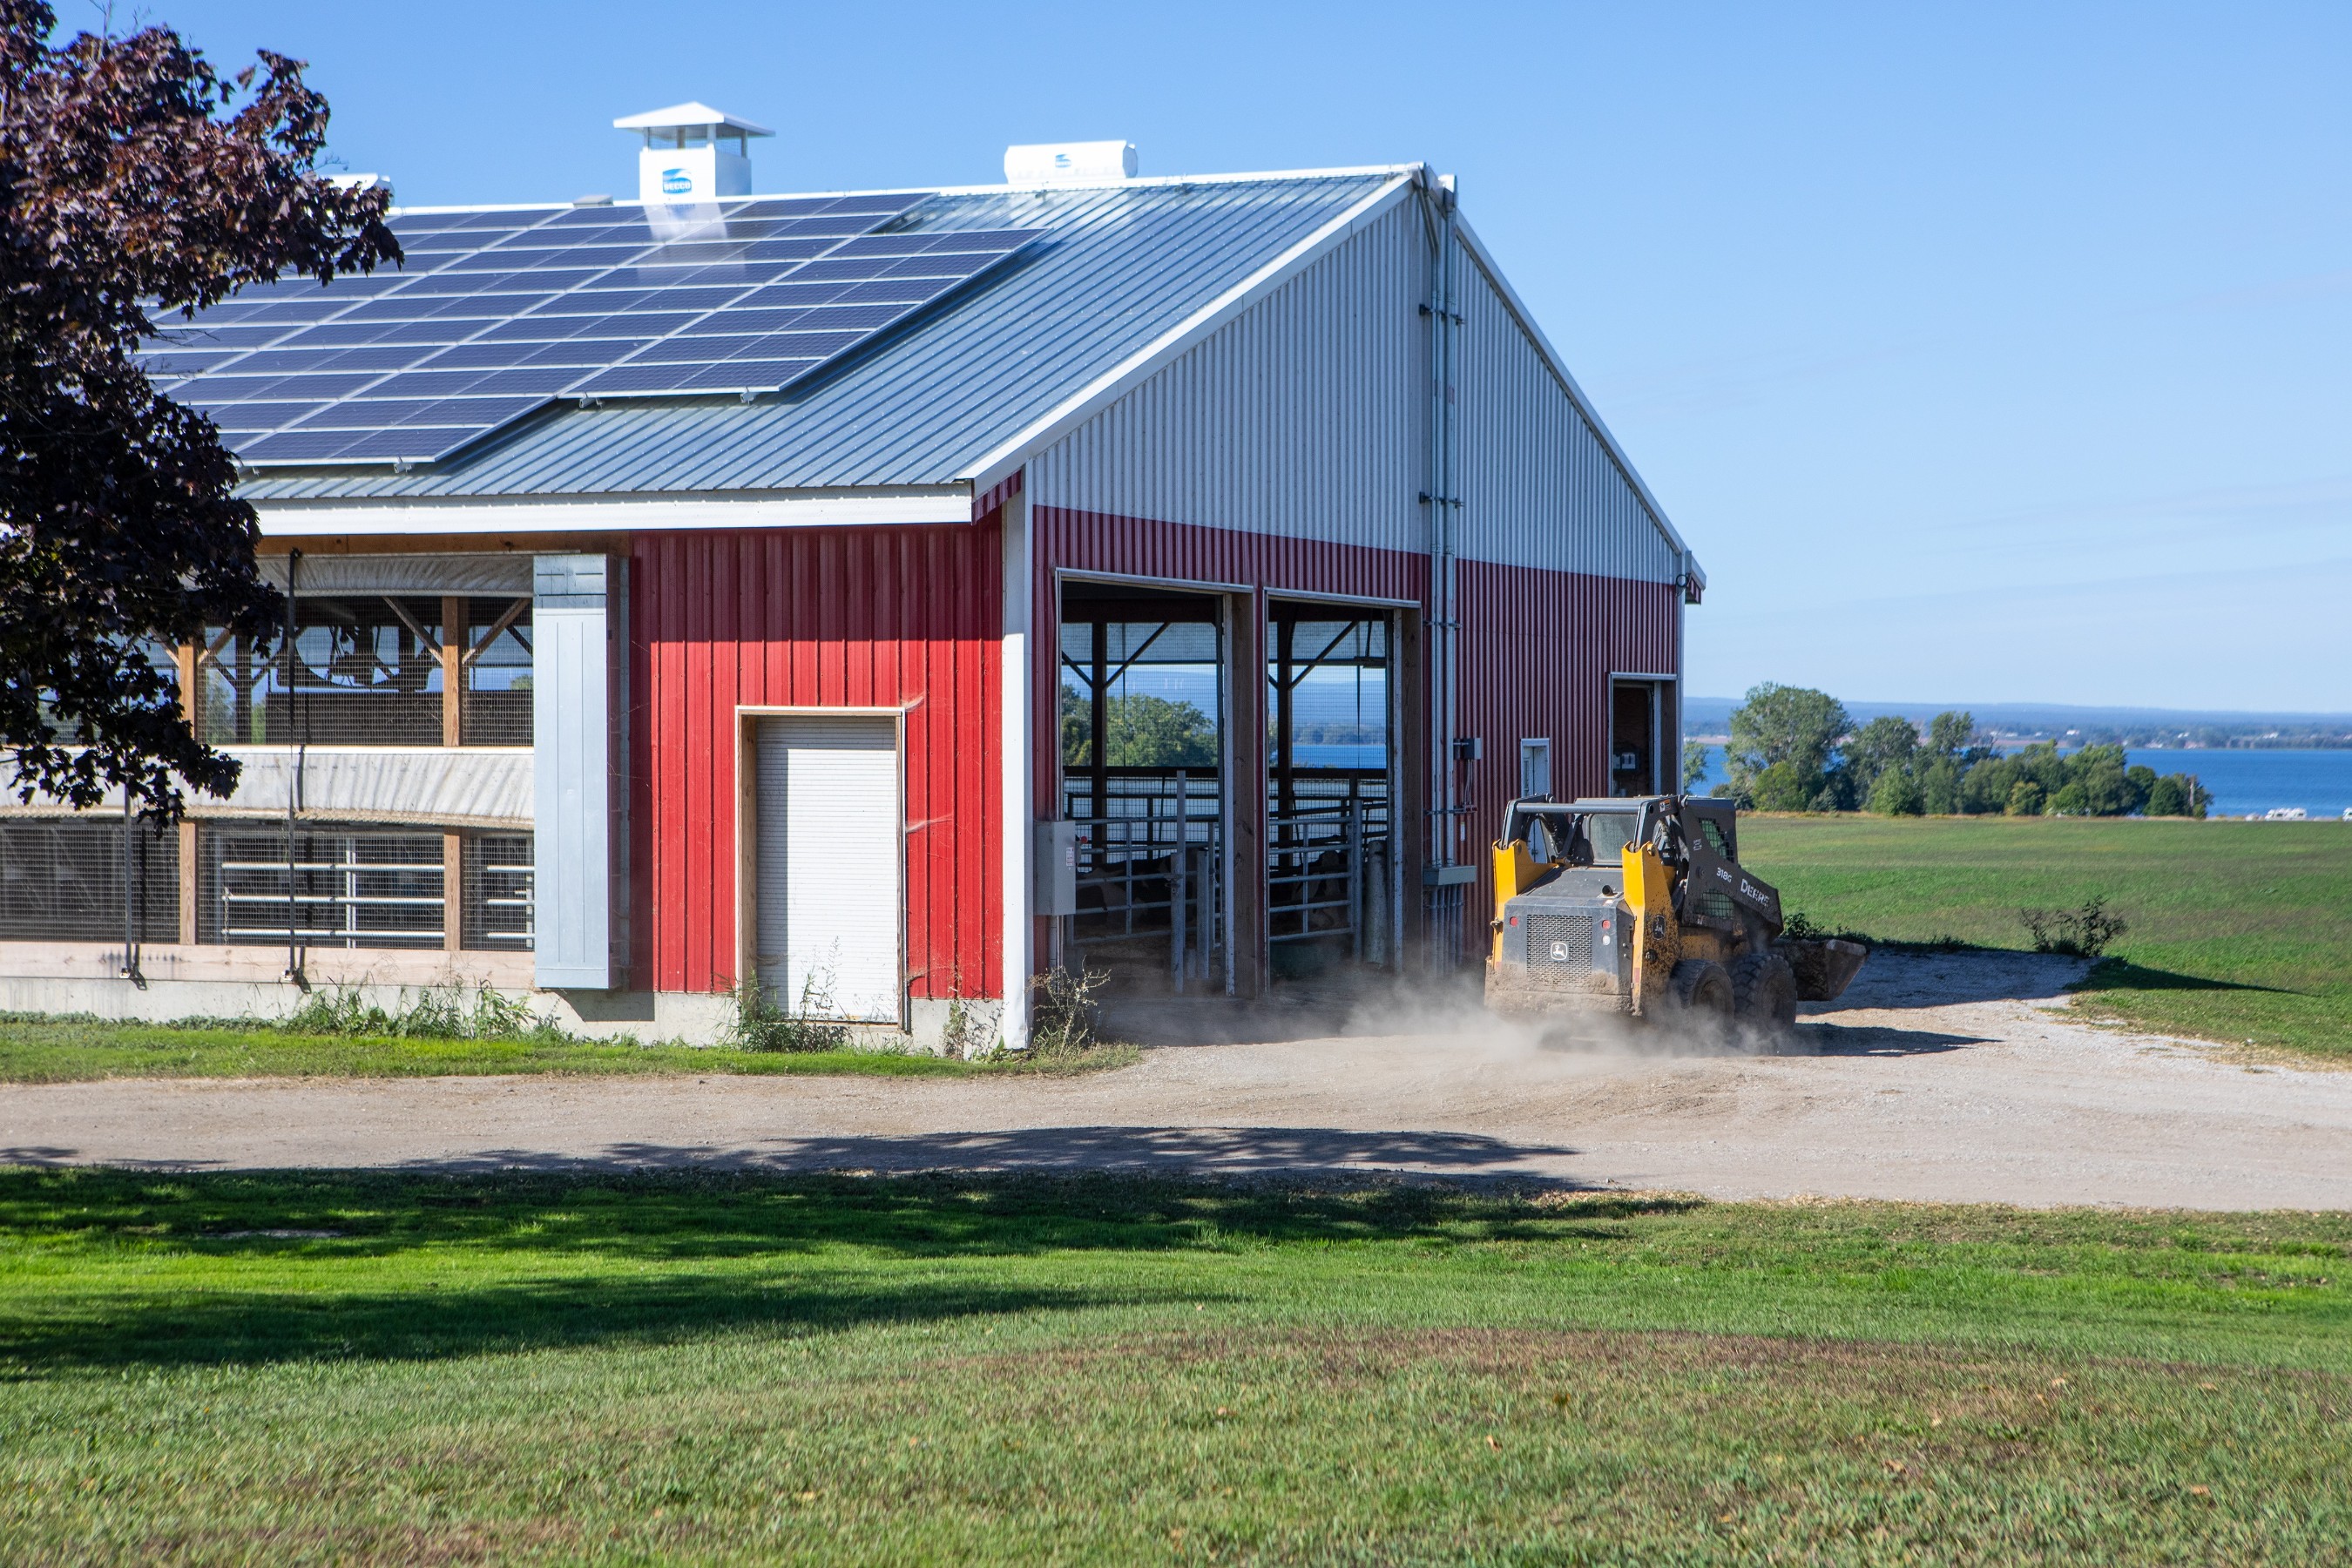 Sunset Lake Farm in Alburgh, VT is participating in Ben & Jerrys Project Mootopia. The farm is reducing its energy costs and carbon footprint by using solar panels on the barn. Photo: Ben & Jerrys